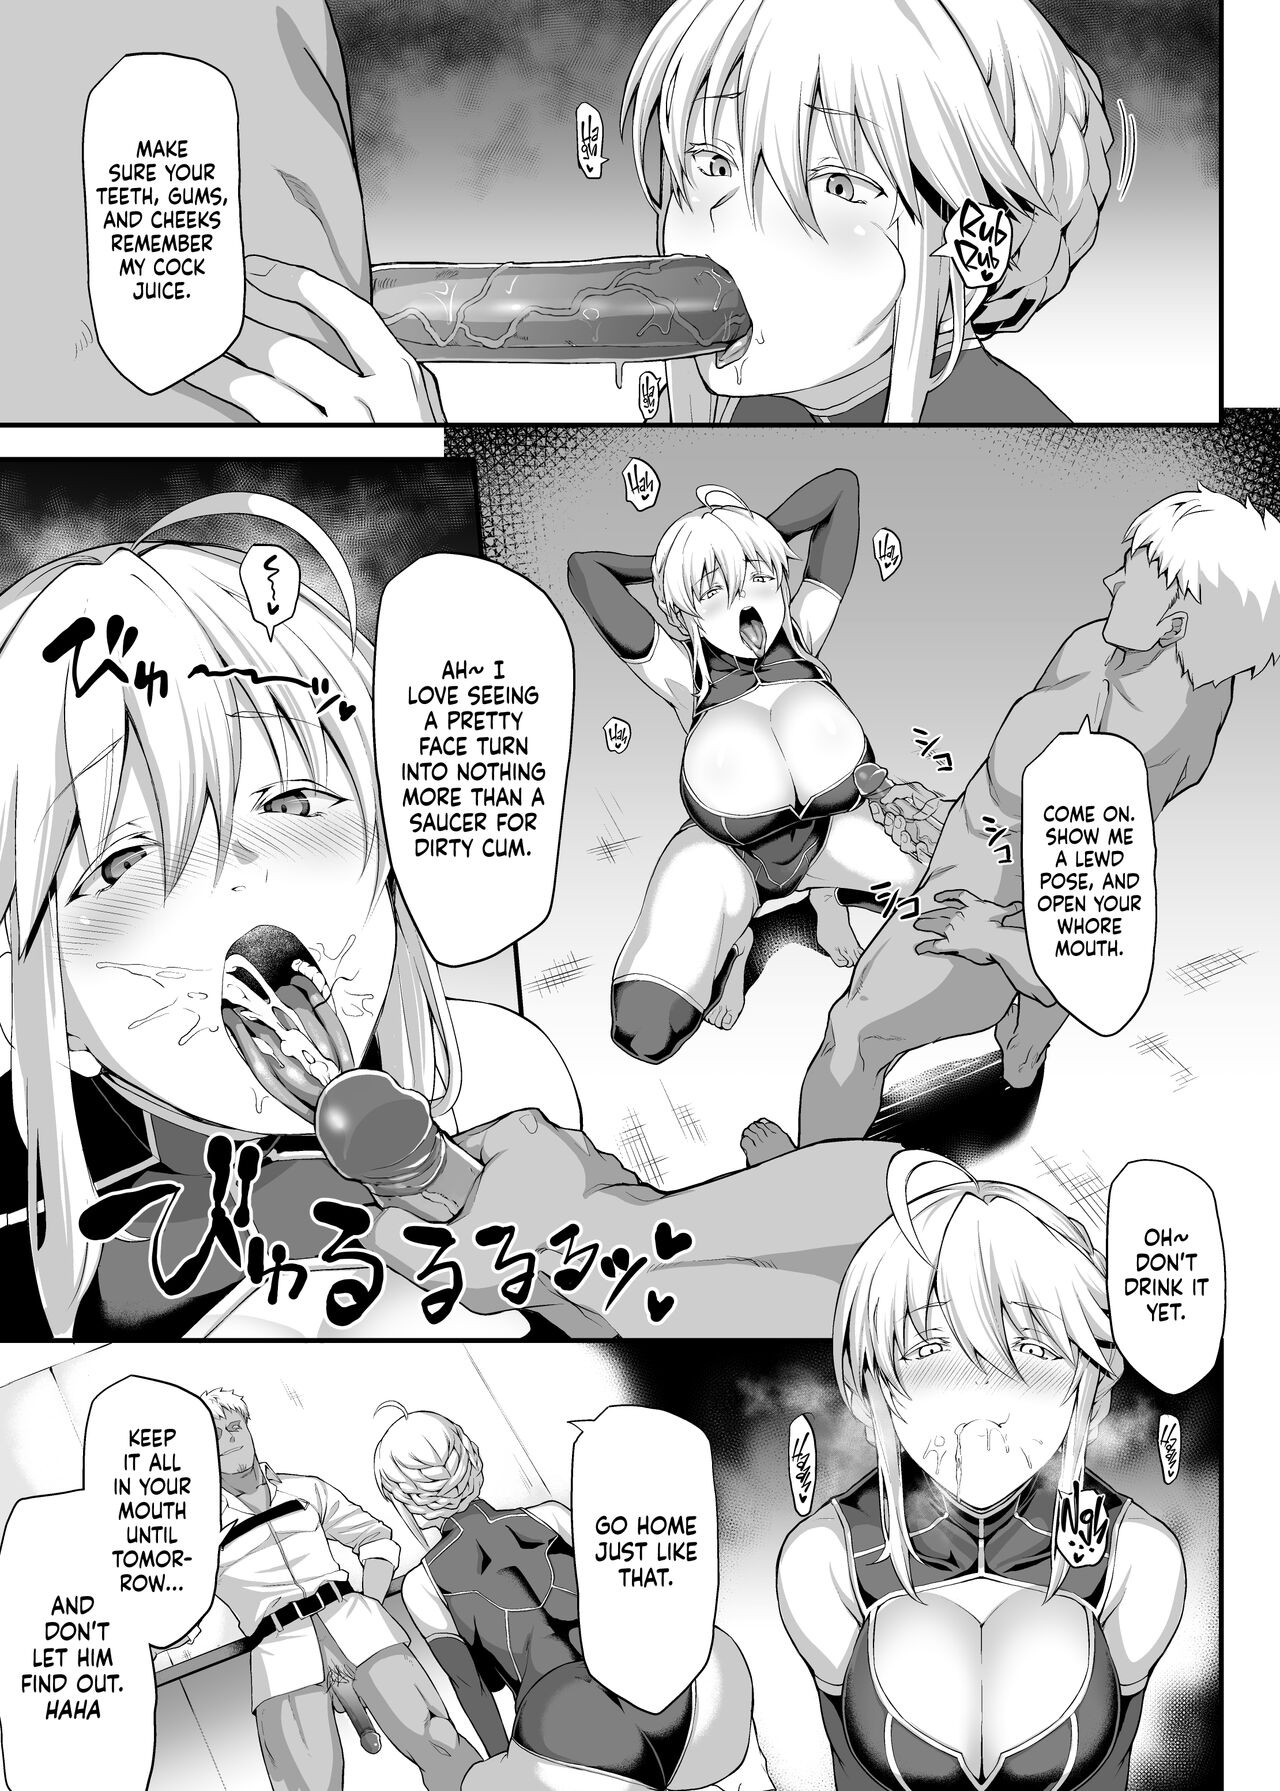 The King Of Knights’ Sweet Hole -Alter-  Porn Comic english 18